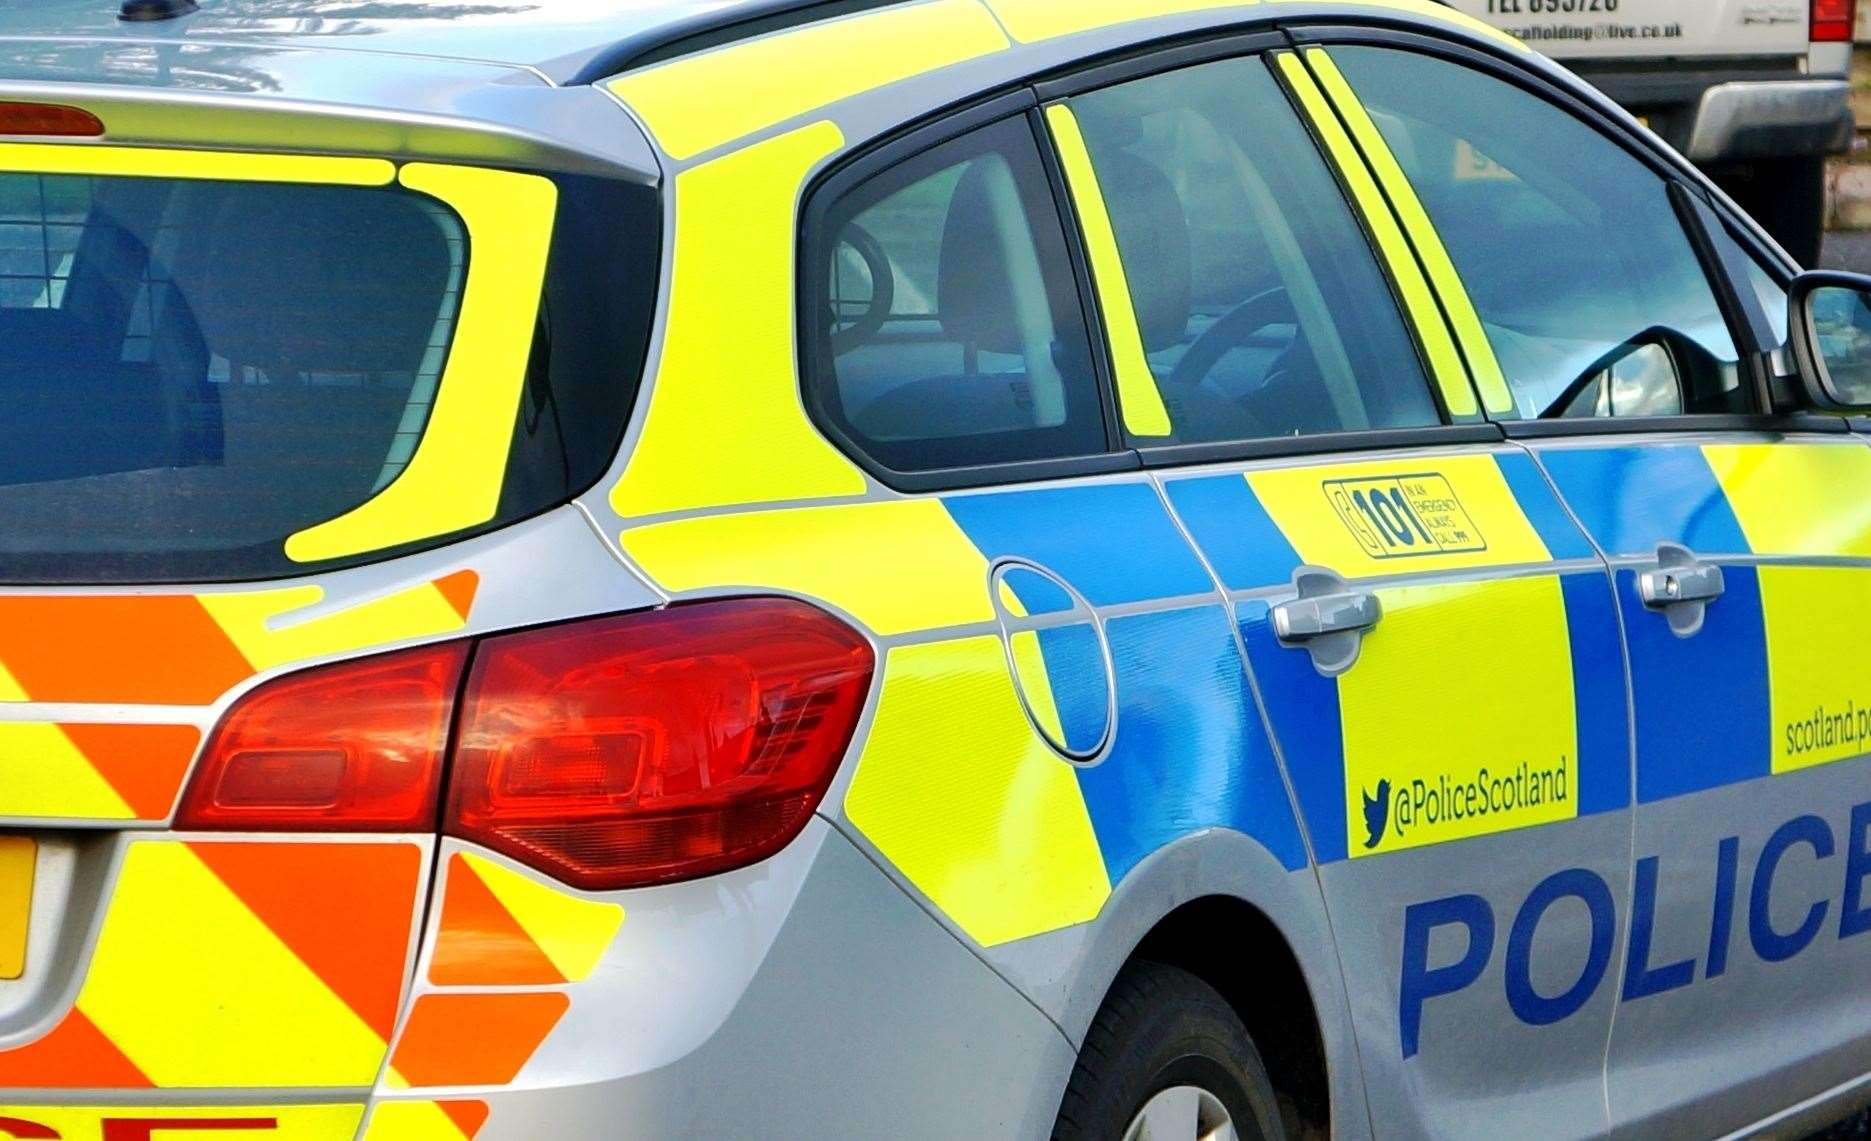 Police were called to the collision on the A9 southbound at Bogbain.